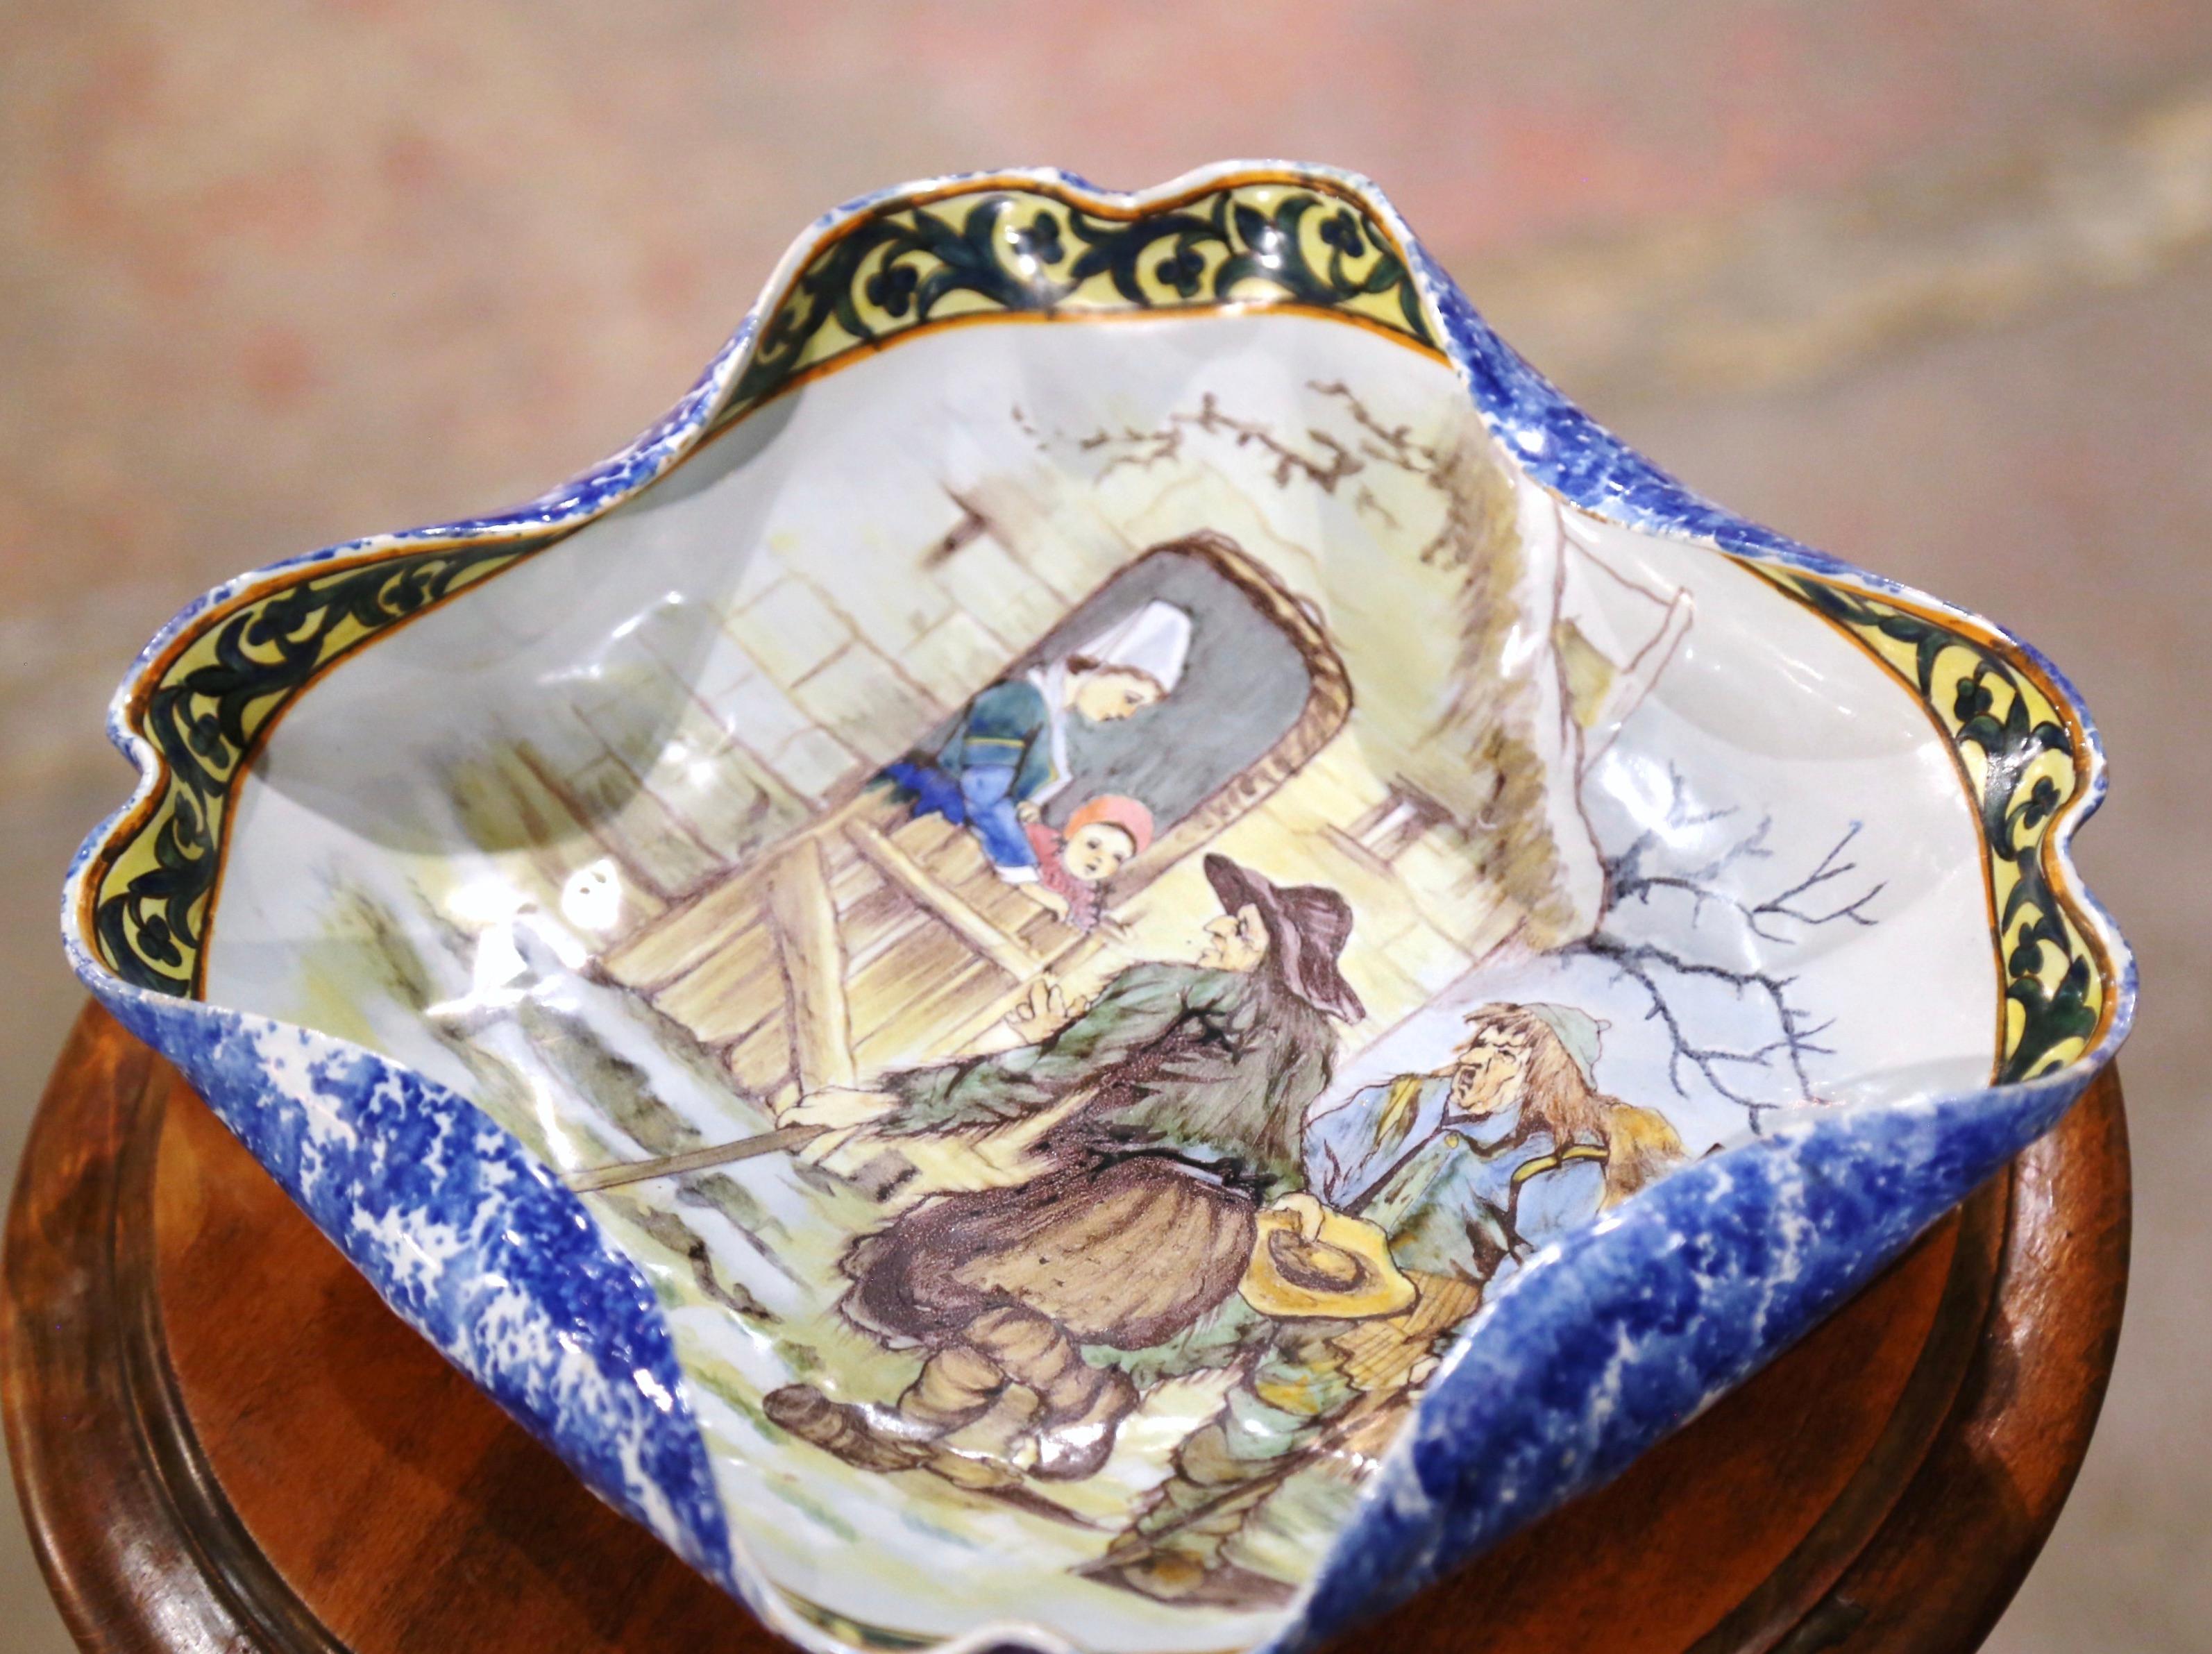 Decorate a table or a shelf with this large antique dish from Porquier Beau. Created in Quimper Brittany, France circa 1895, the colorful hand painted ceramic dish is almost square in share and embellished with scalloped and curved edges. The tray